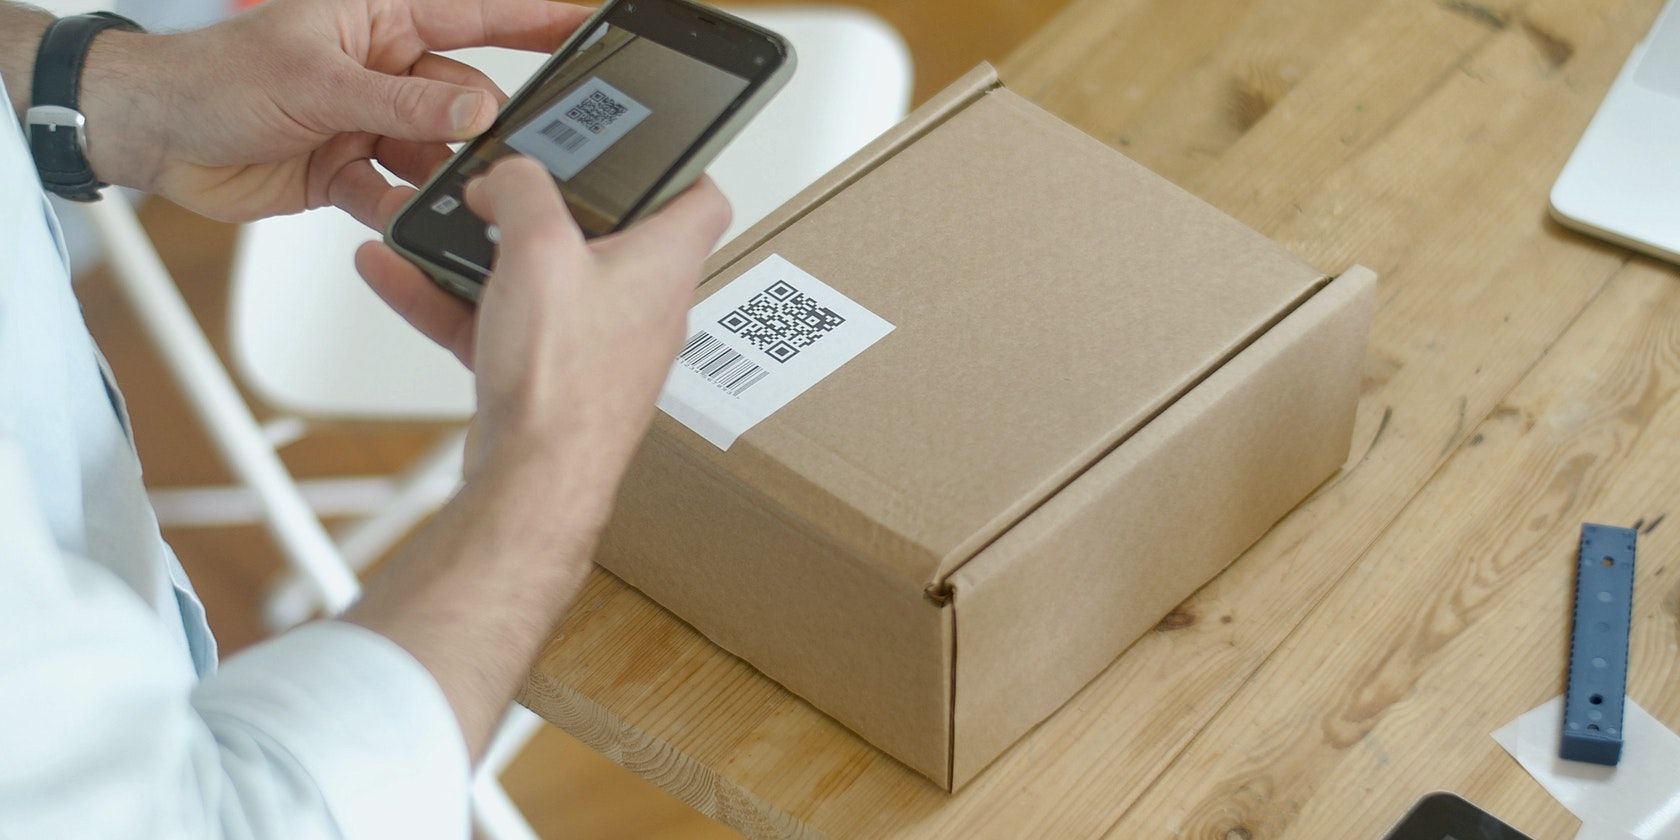 scanning a square code parcel iphone